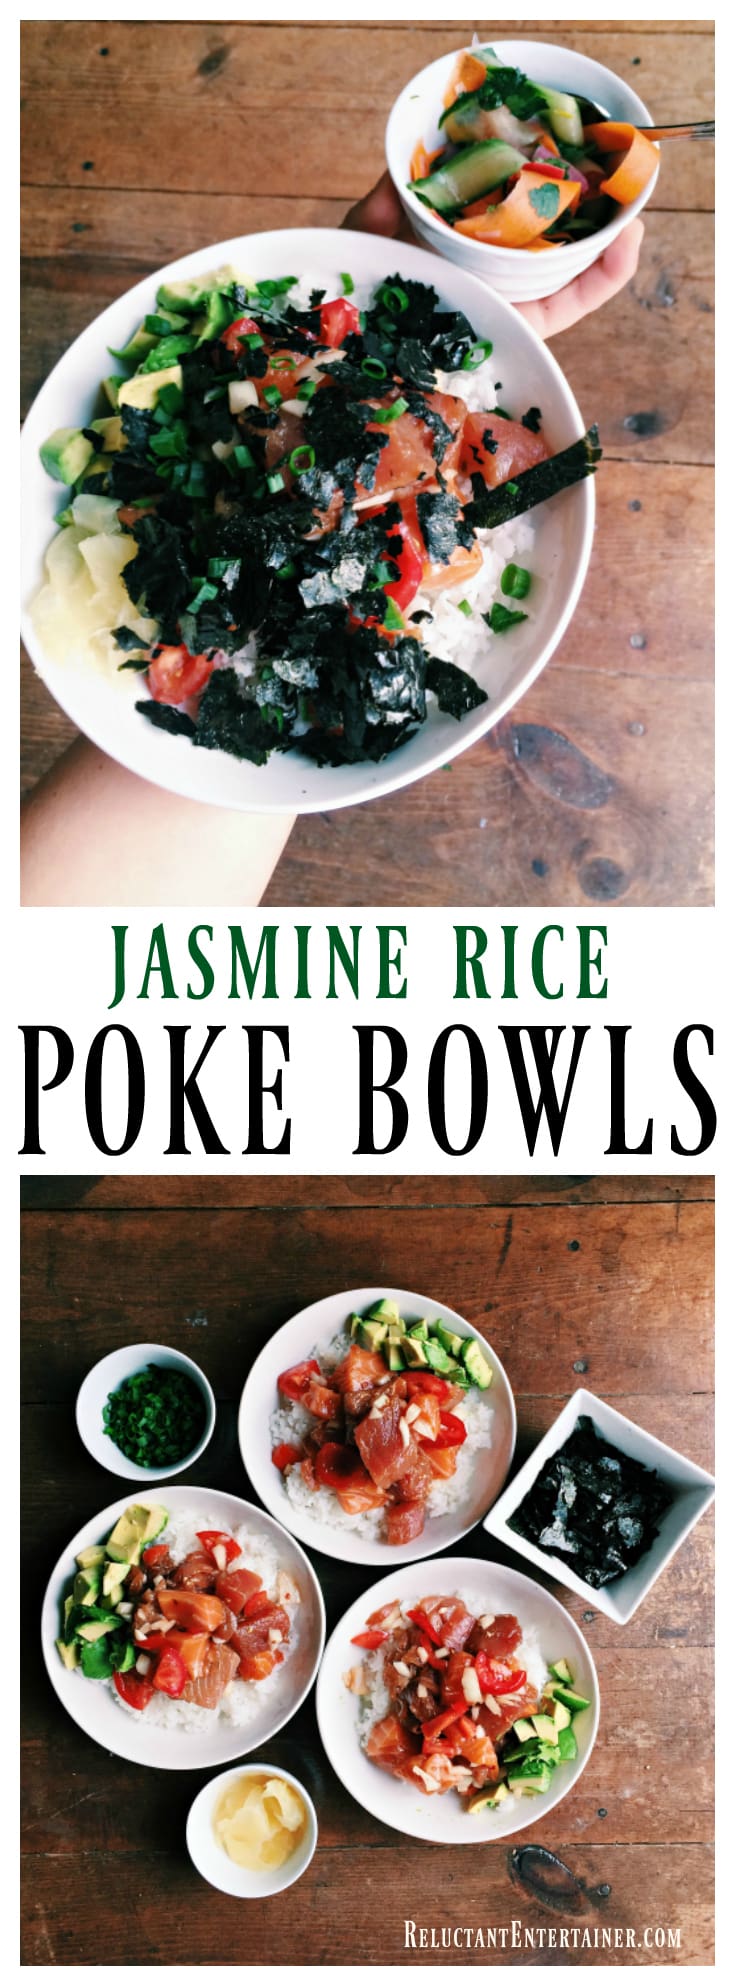 Jasmine Rice Poke Bowls, a fresh and summery meal for any season | ReluctantEntertainer.com